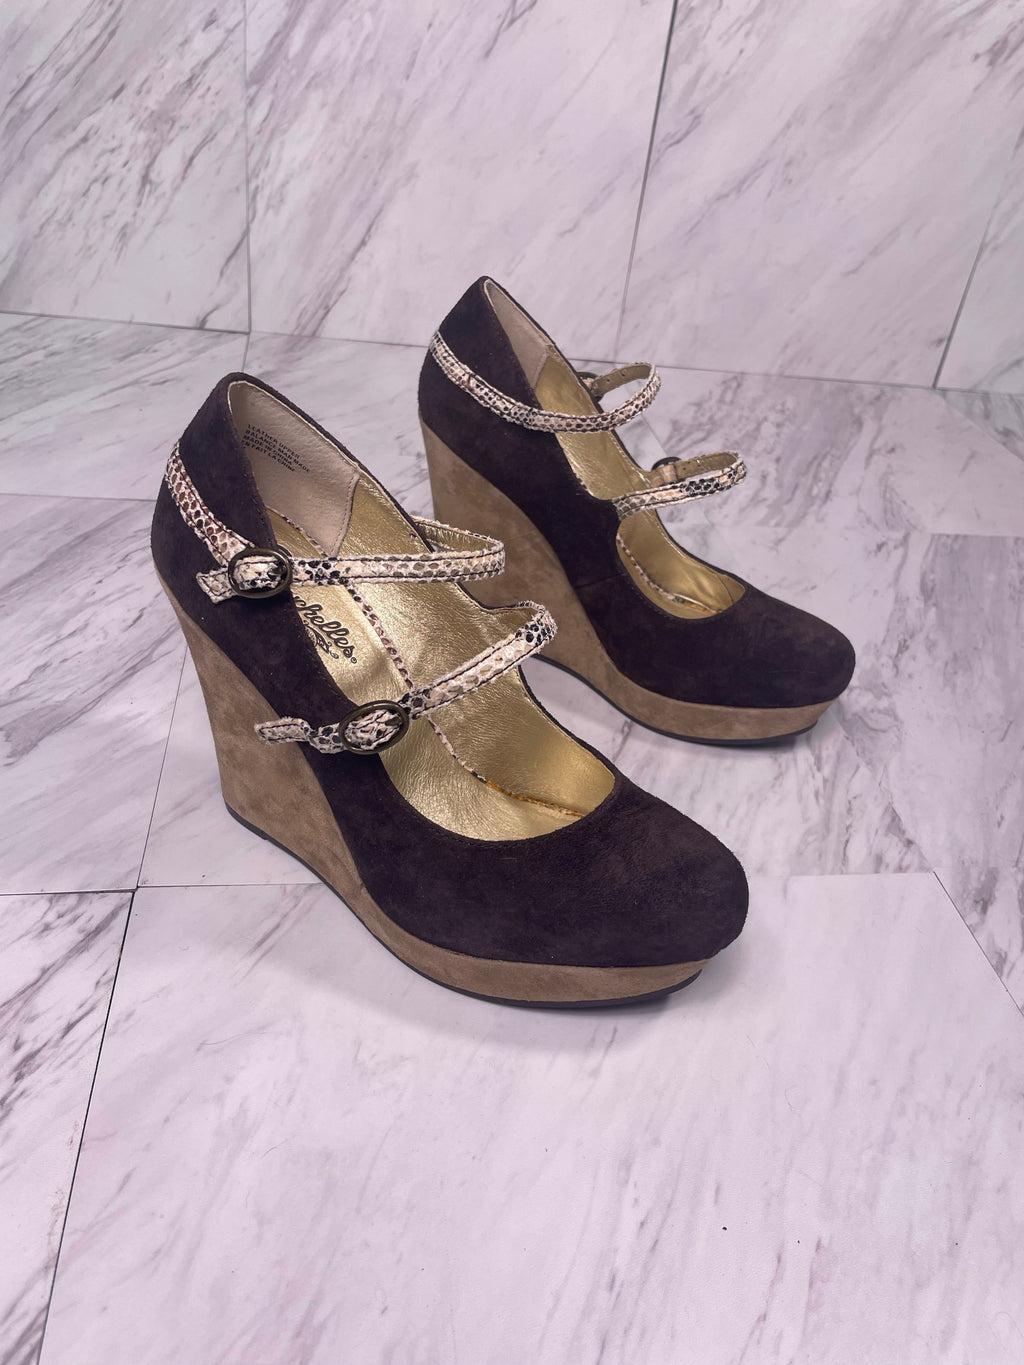 Seychelles brown suede wedges, Size 7